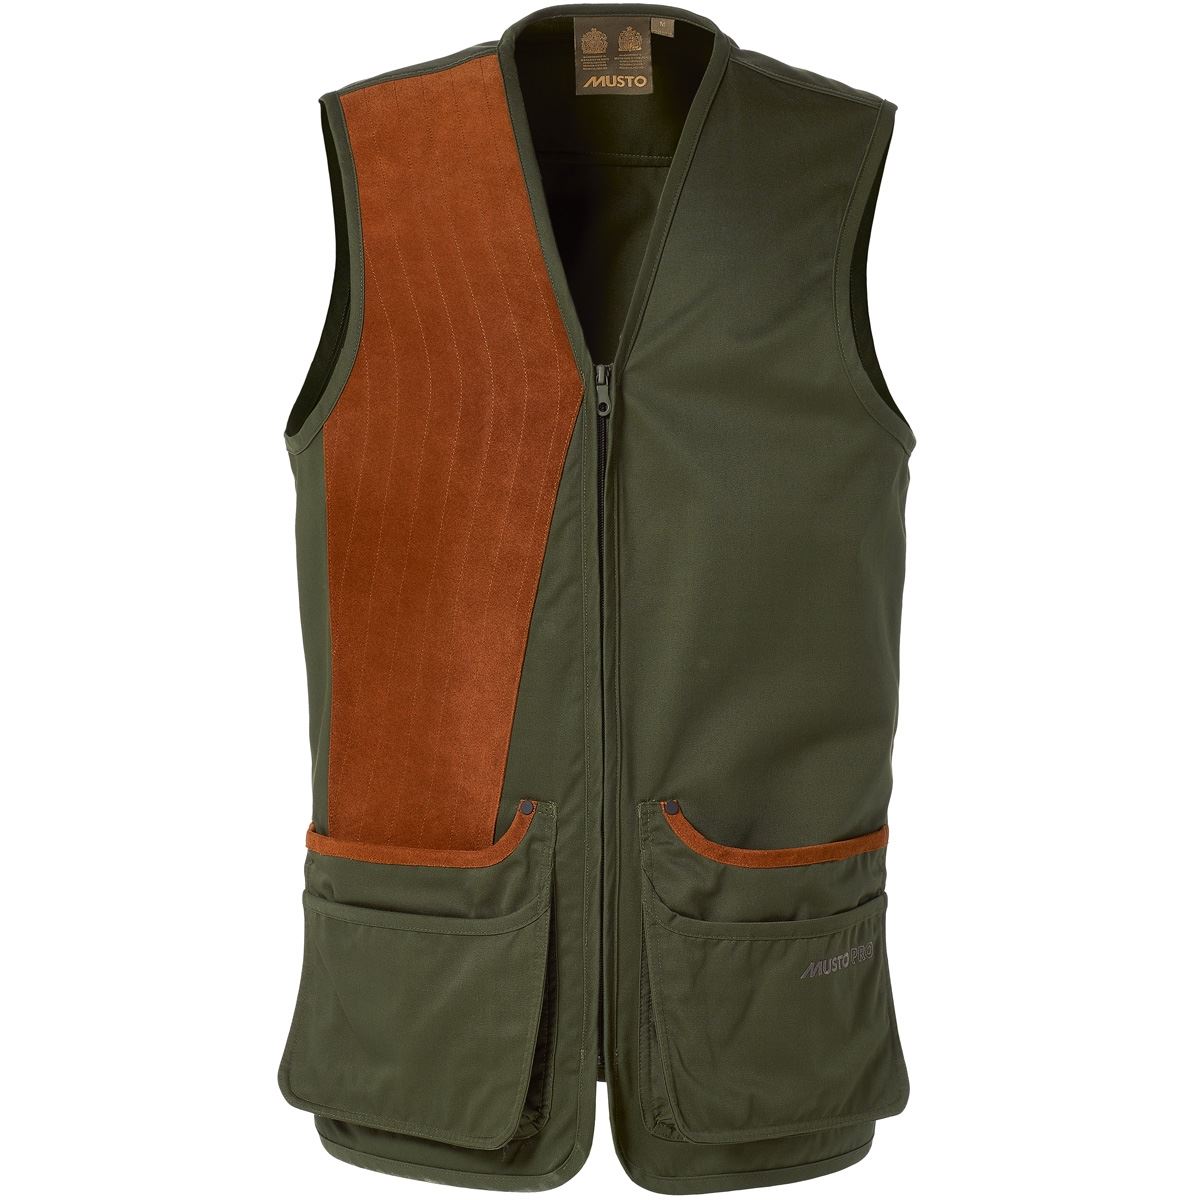 What is the purpose of the easy access below cartridge pockets in the Musto shooting vest?